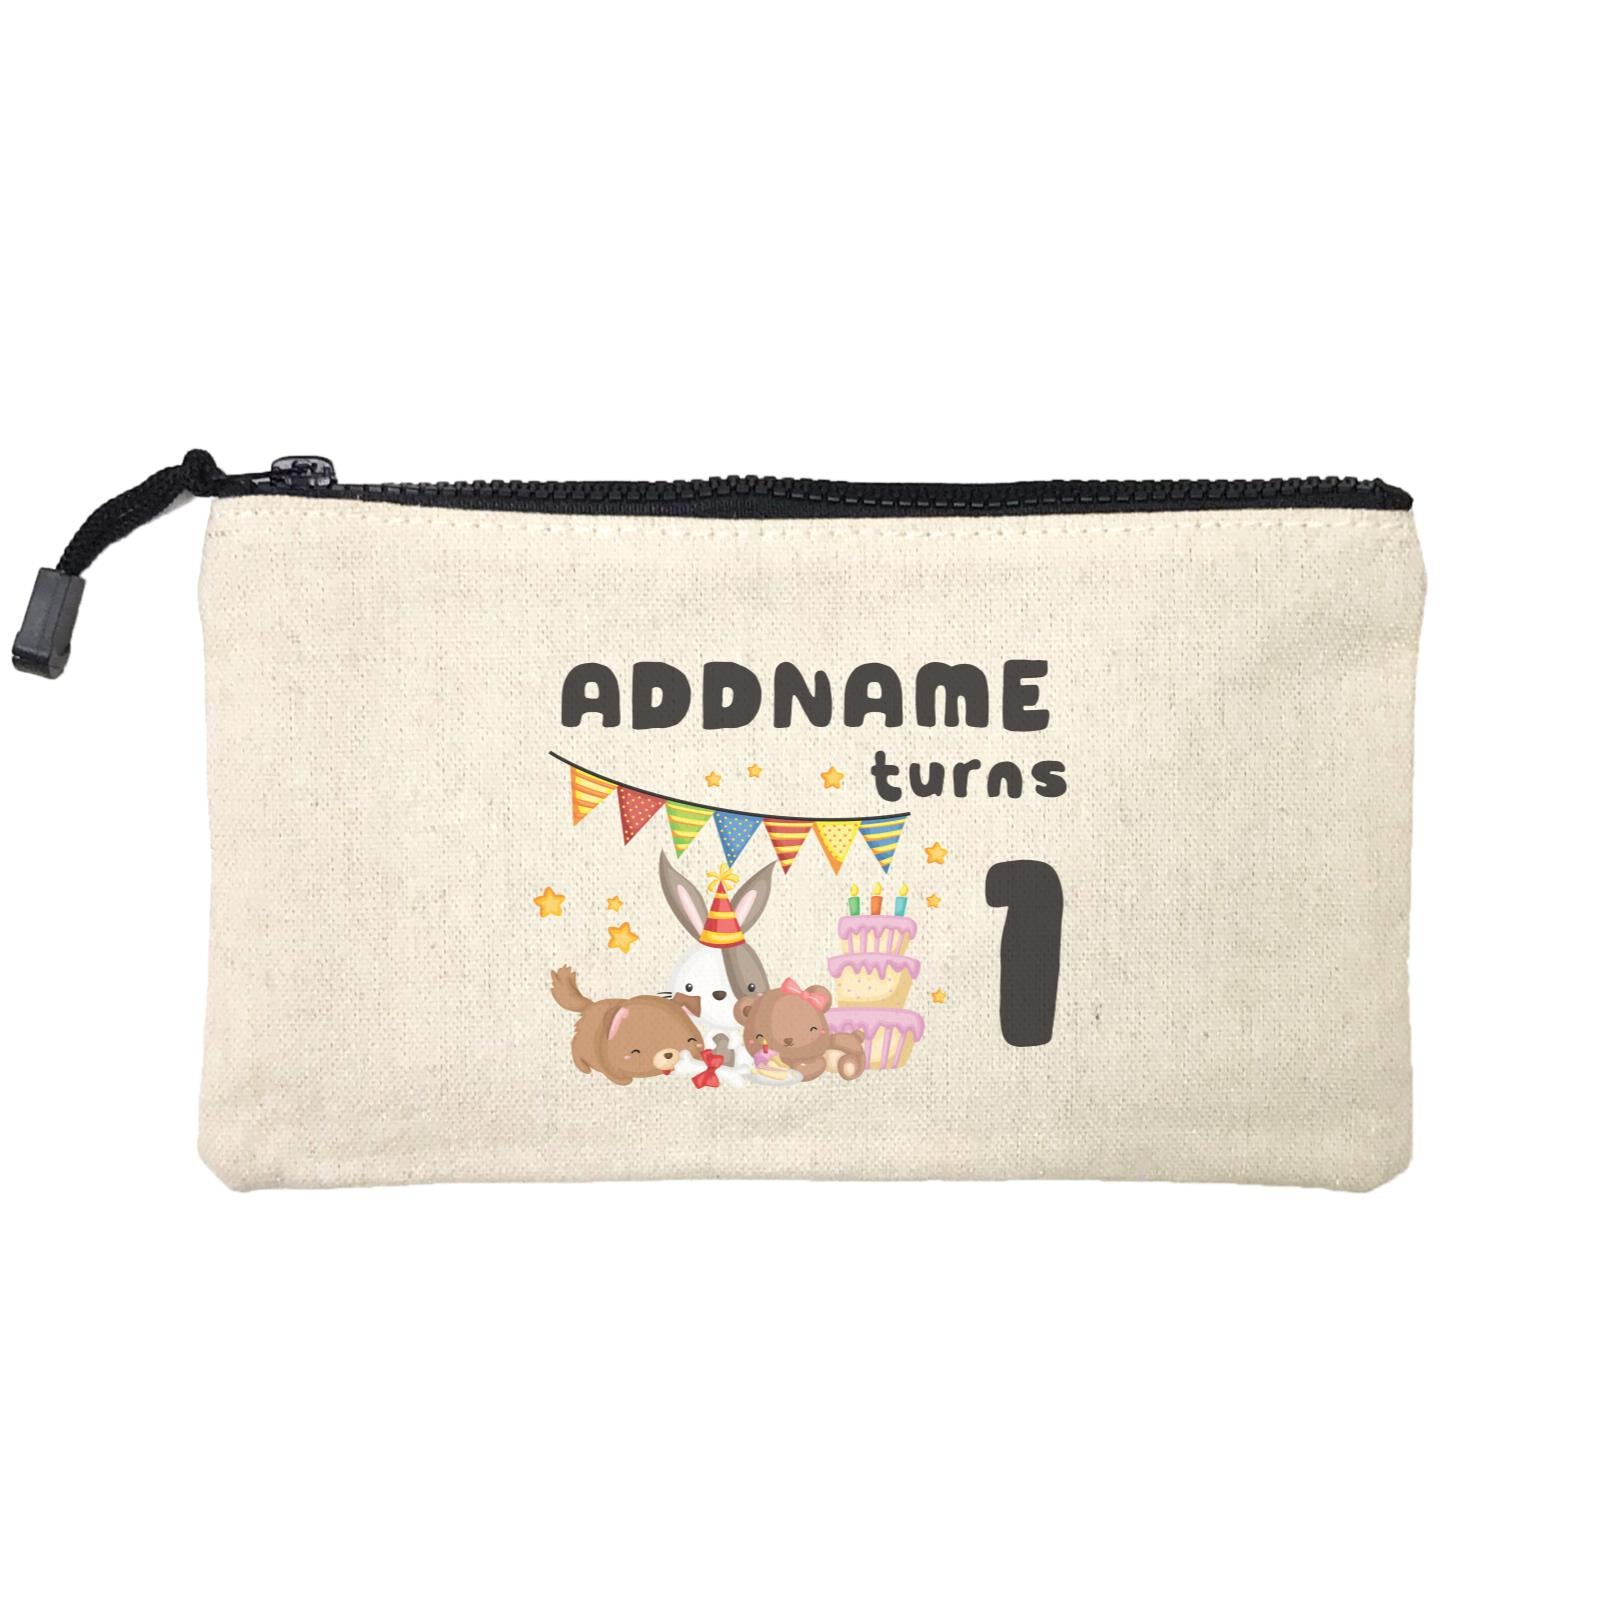 Birthday Friendly Animals Rabbit Bear And Dog Party Eating Cake Addname Turns 1 Mini Accessories Stationery Pouch